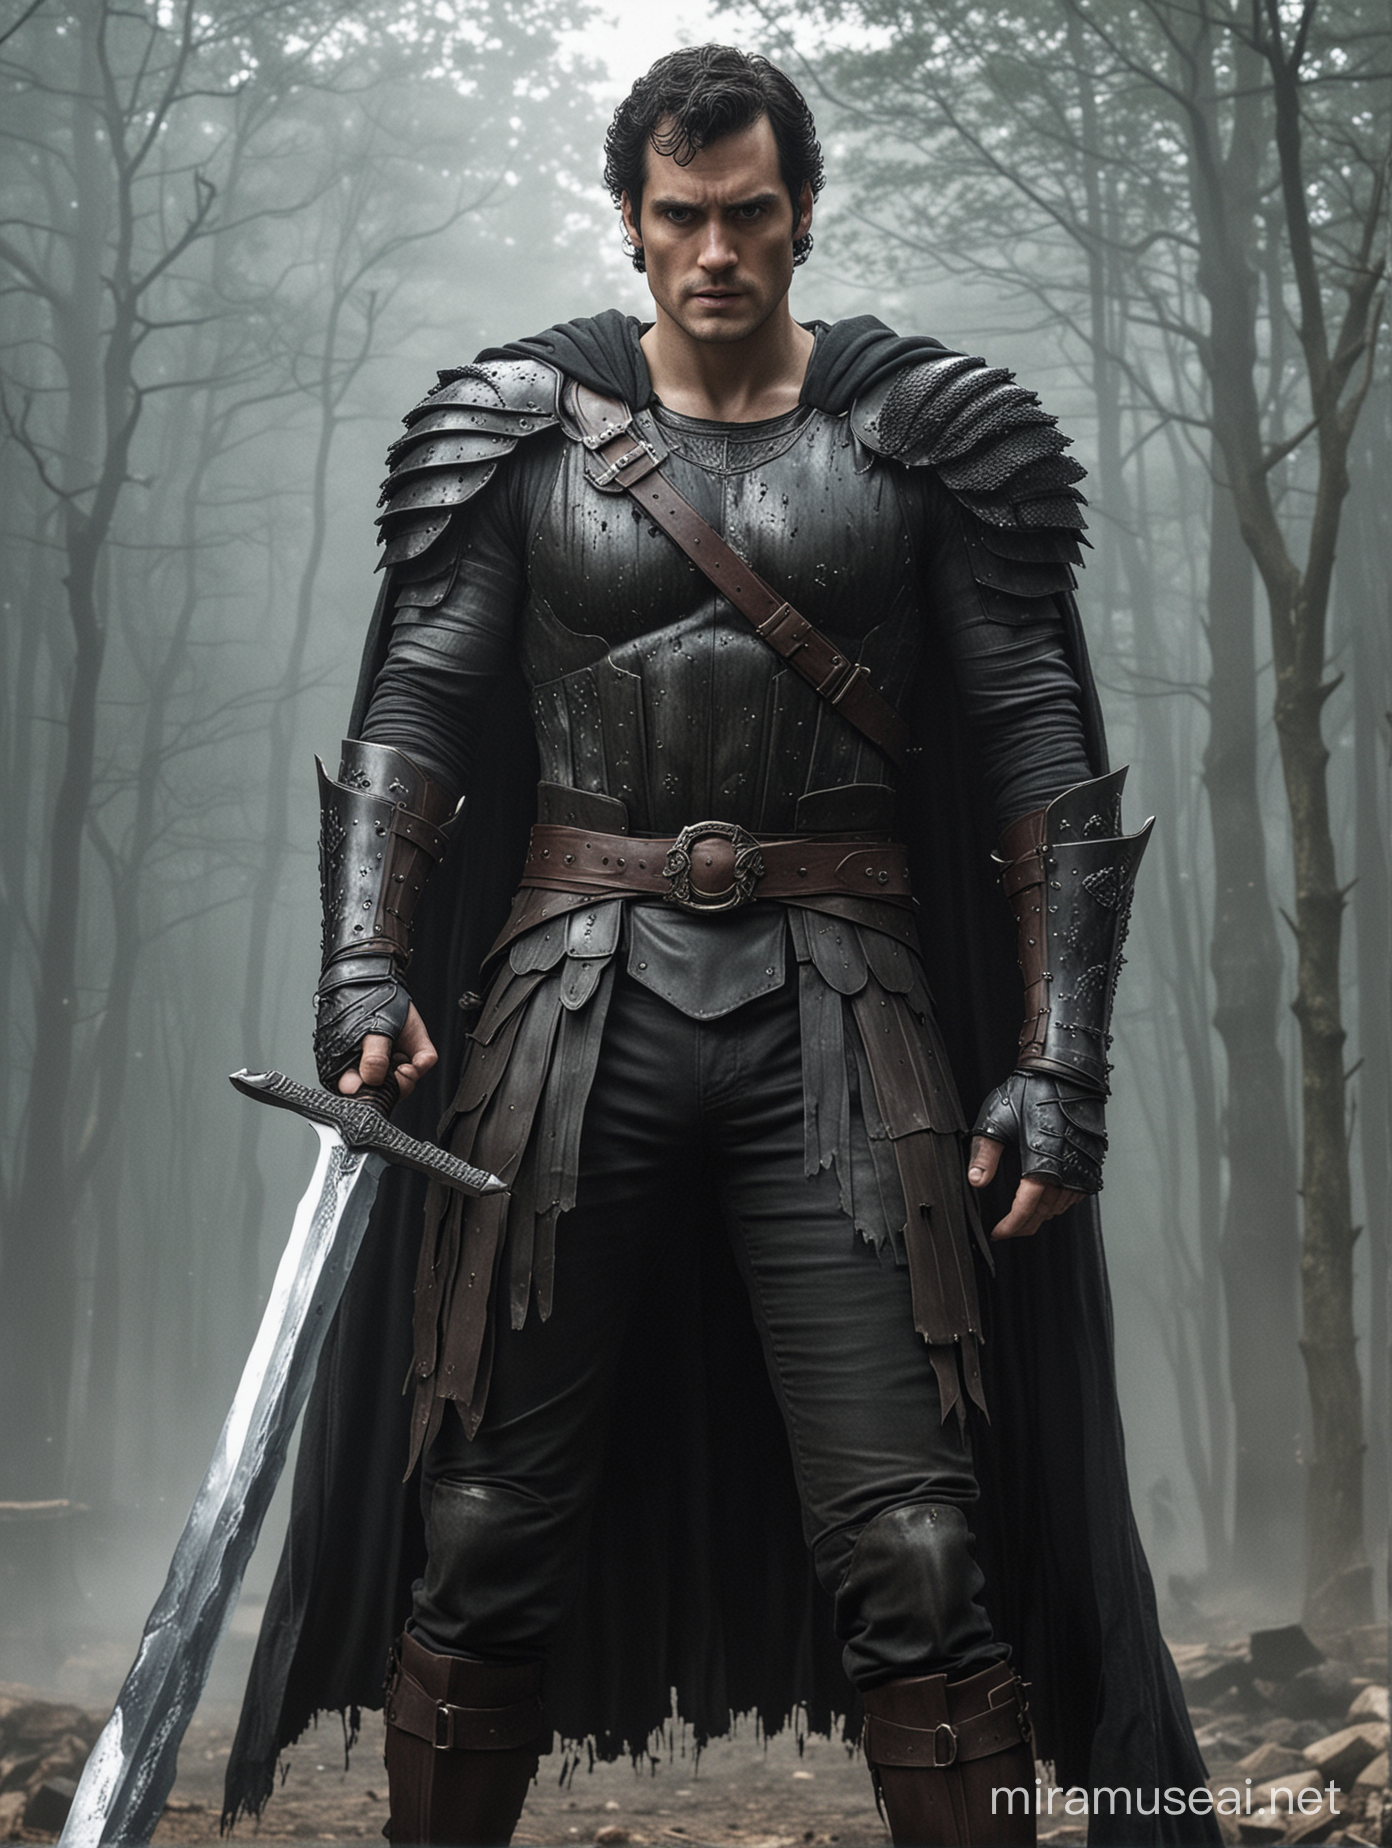 Henry Cavill as Guts from "Berserk", standing with huge sword, and his one hand being cut-off